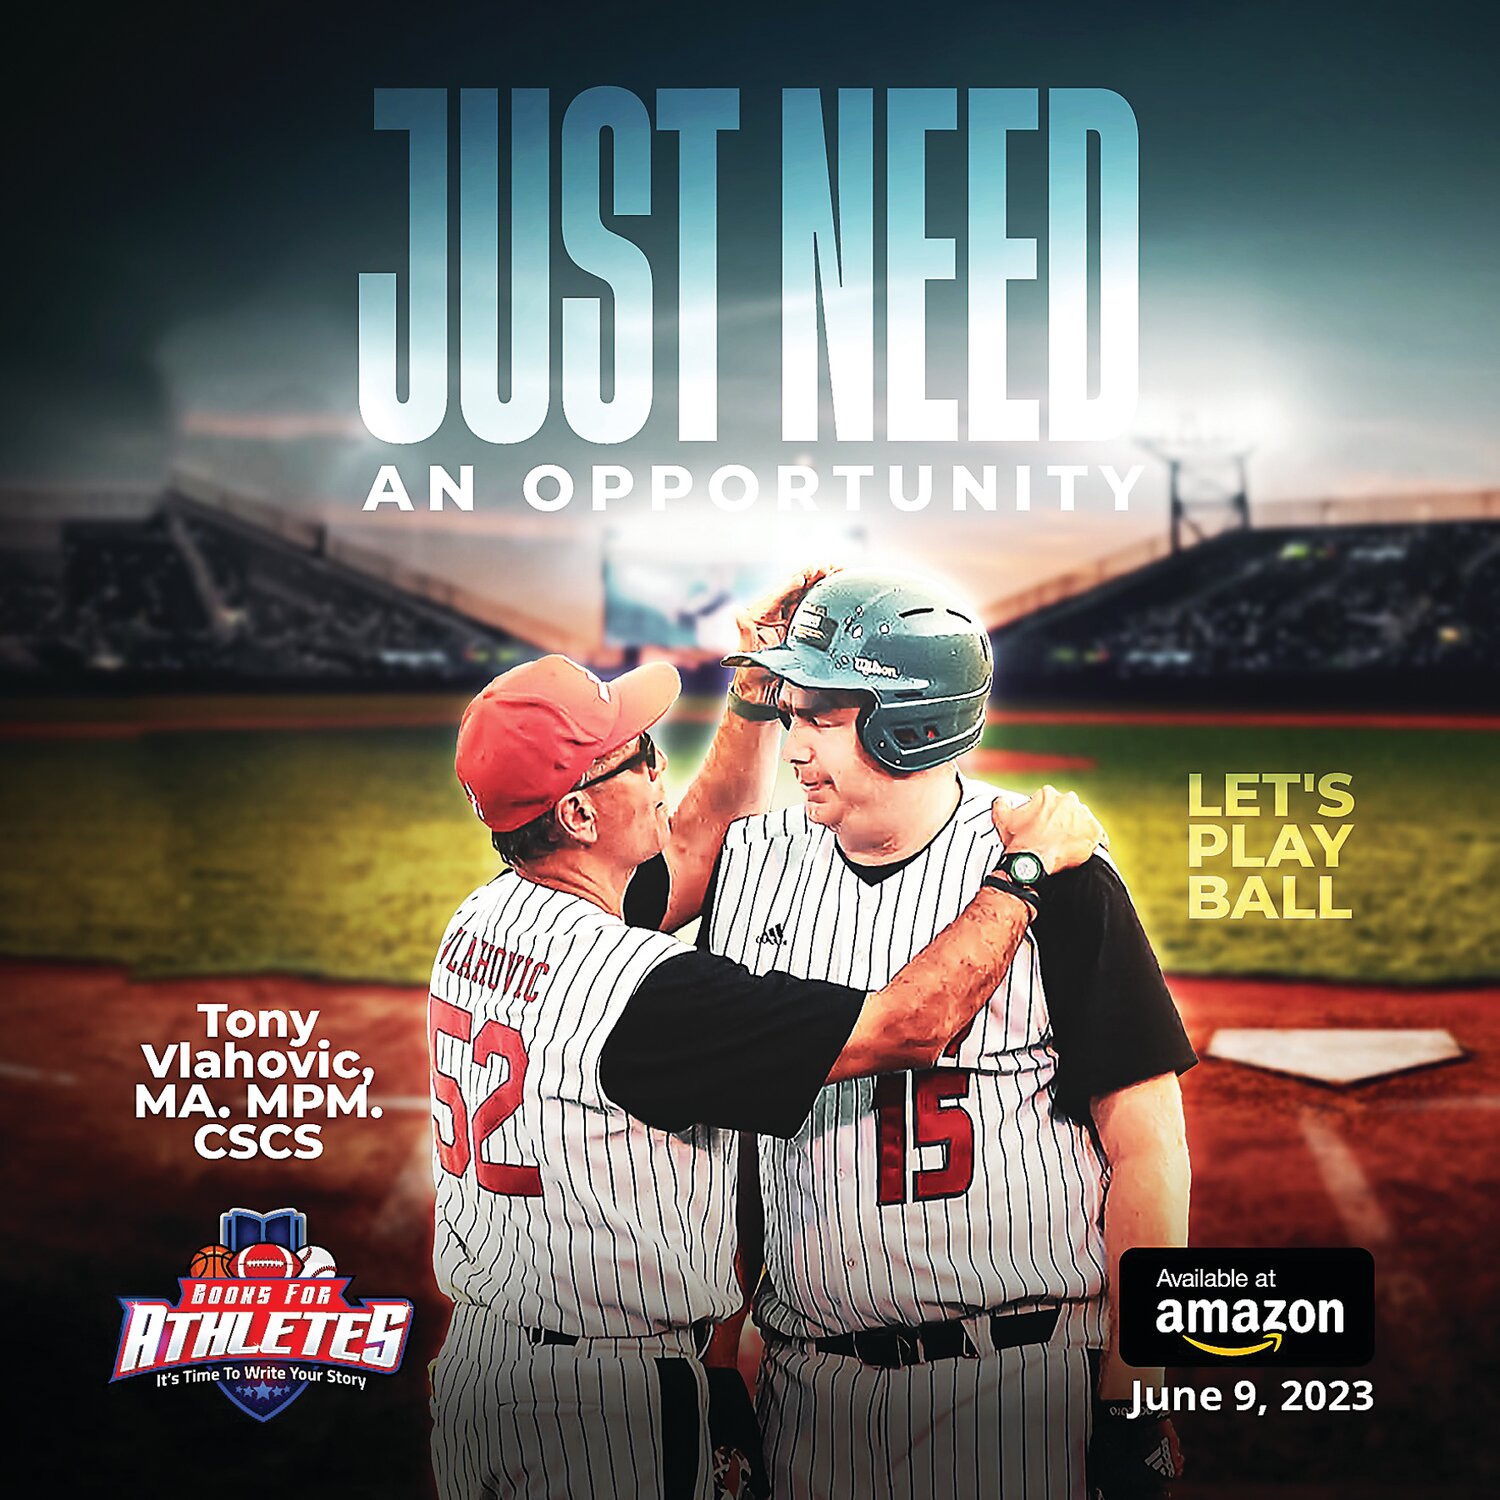 The cover of Tony Vlahovic’s book, “Just Need An Opportunity: Let’s Play Ball.